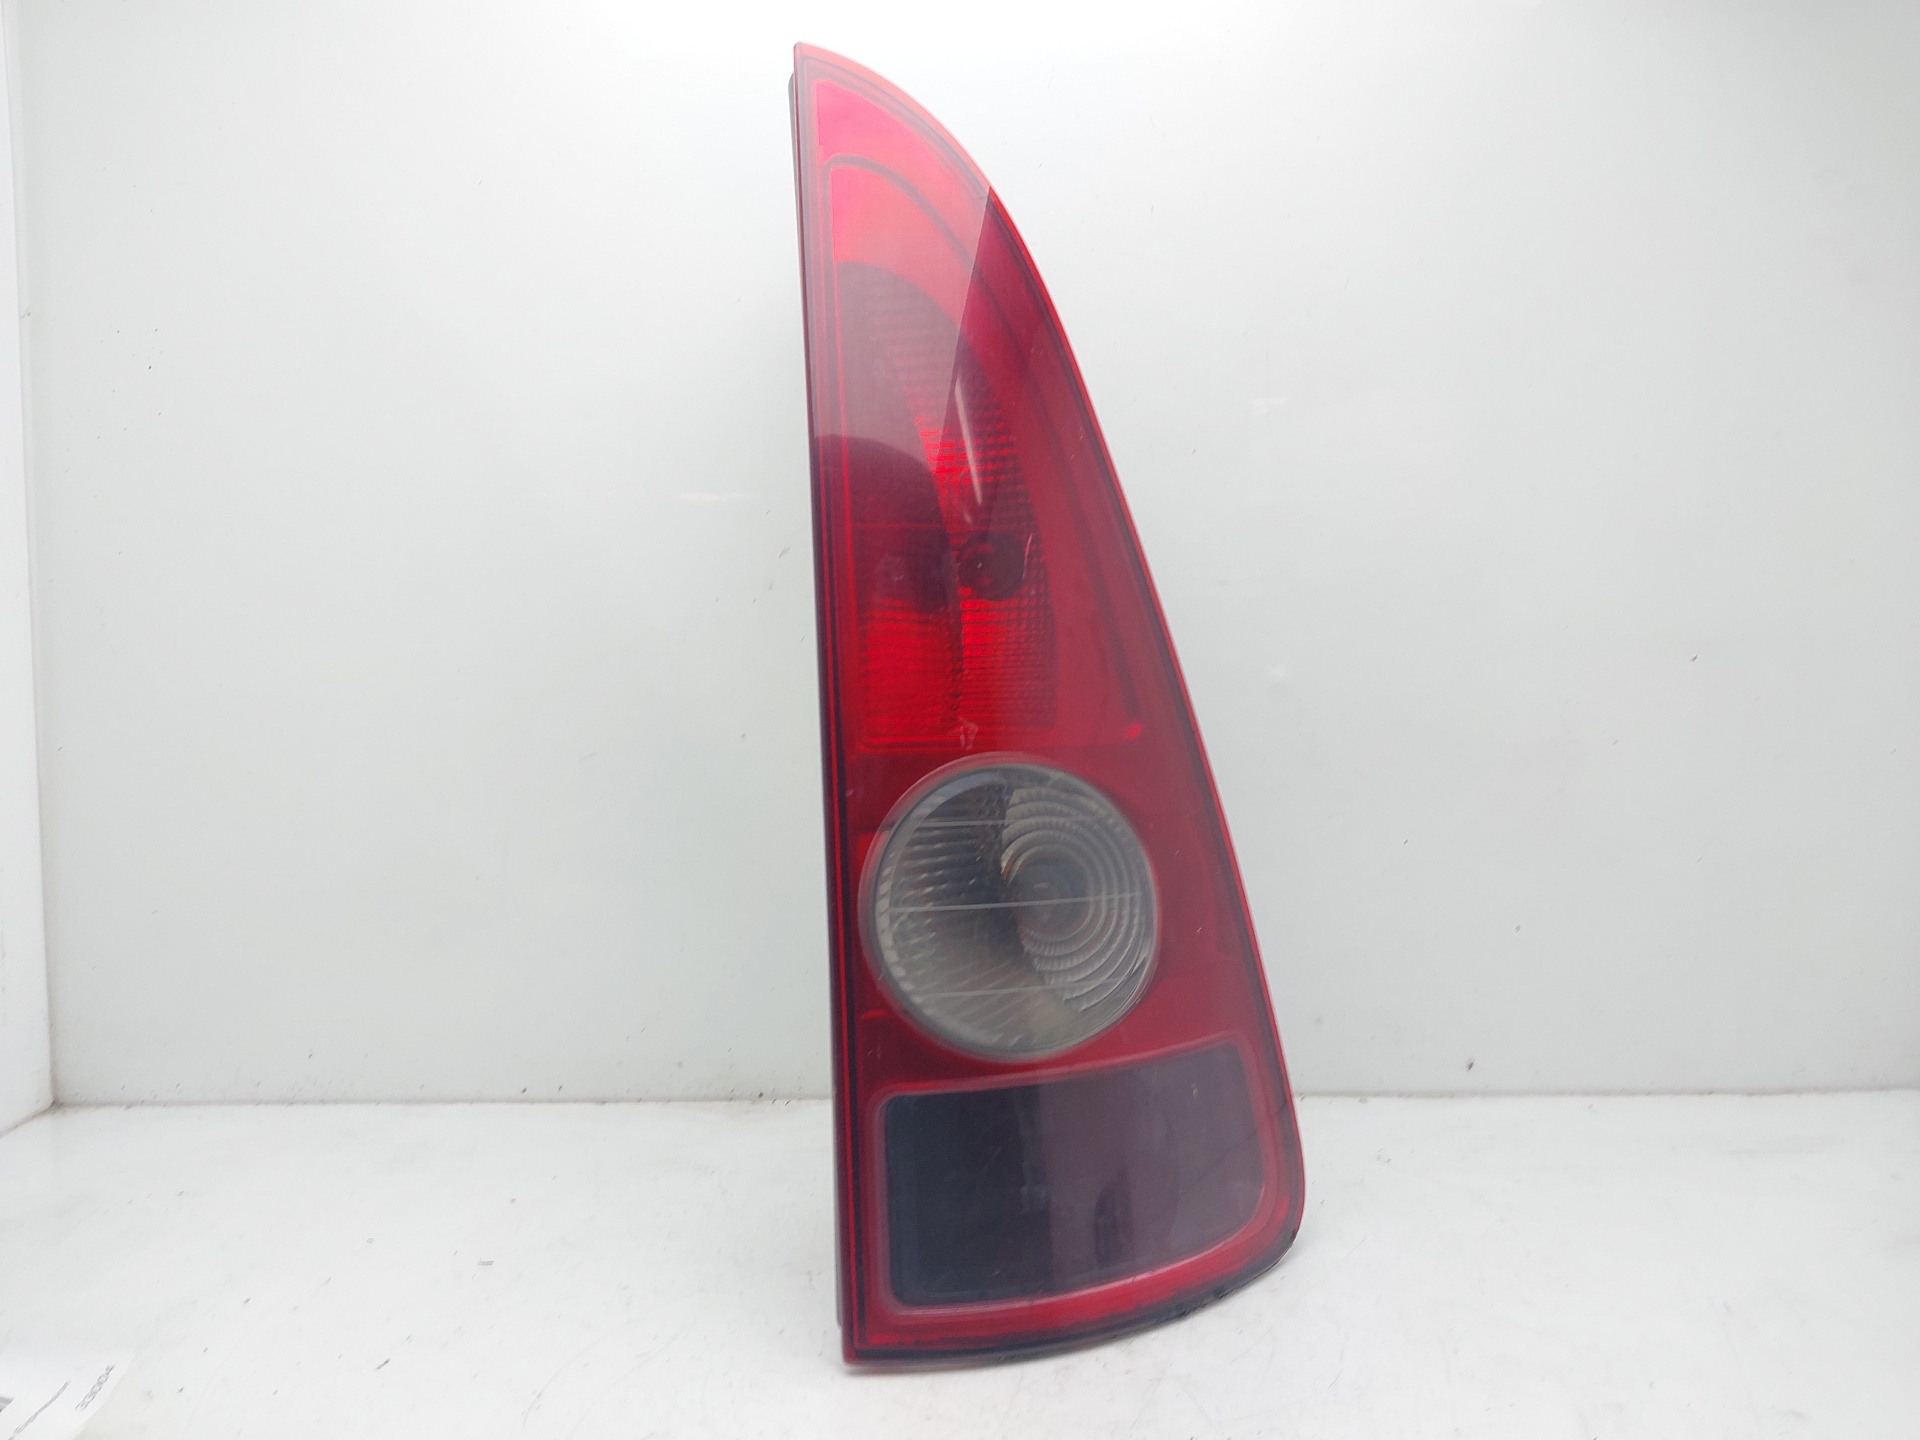 RENAULT Espace 4 generation (2002-2014) Rear Right Taillight Lamp 8200027152 22570921